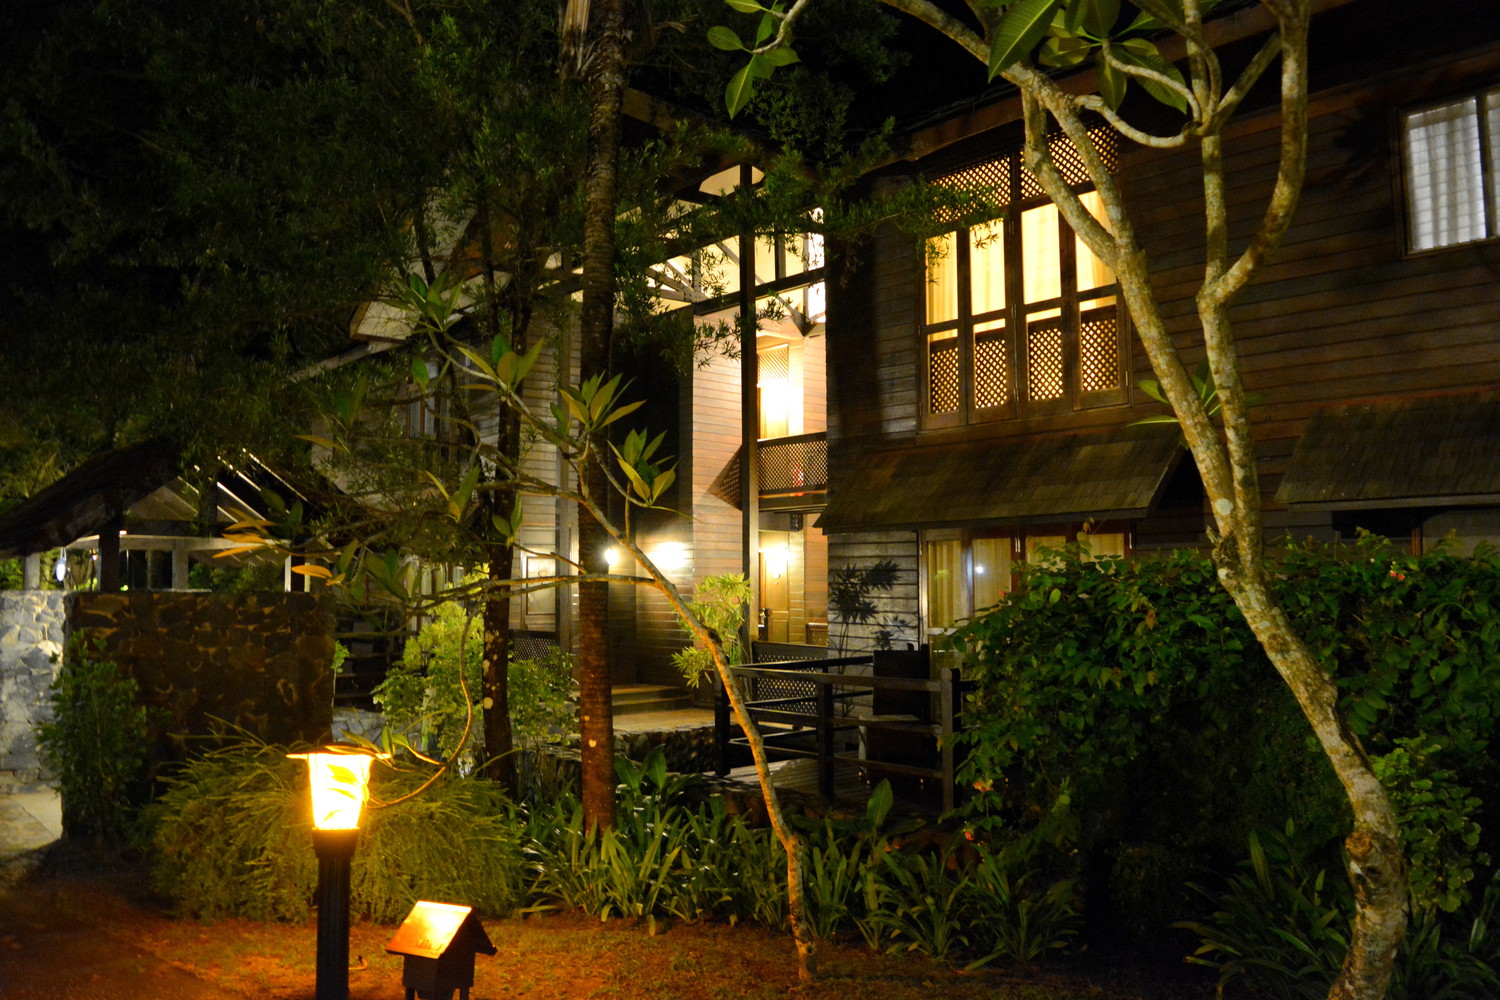 A two storey hotel building made of wood surrounded by trees and shrubs low height orange lights